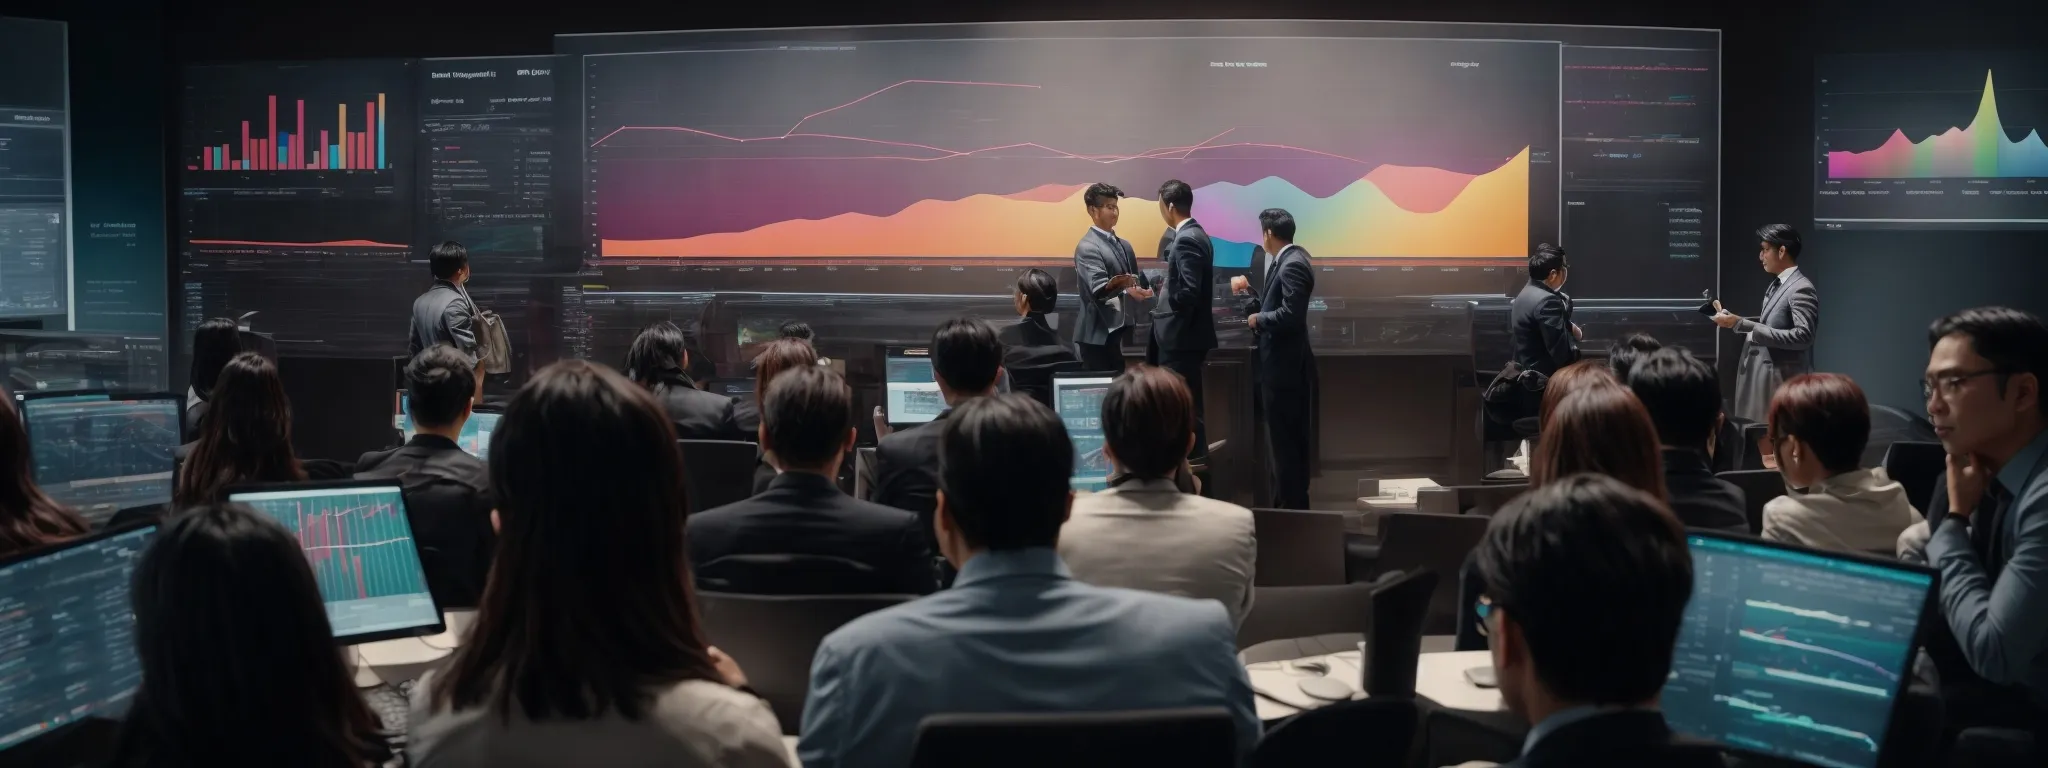 a group of professionals gathered around a large screen displaying colorful graphs and analytics.